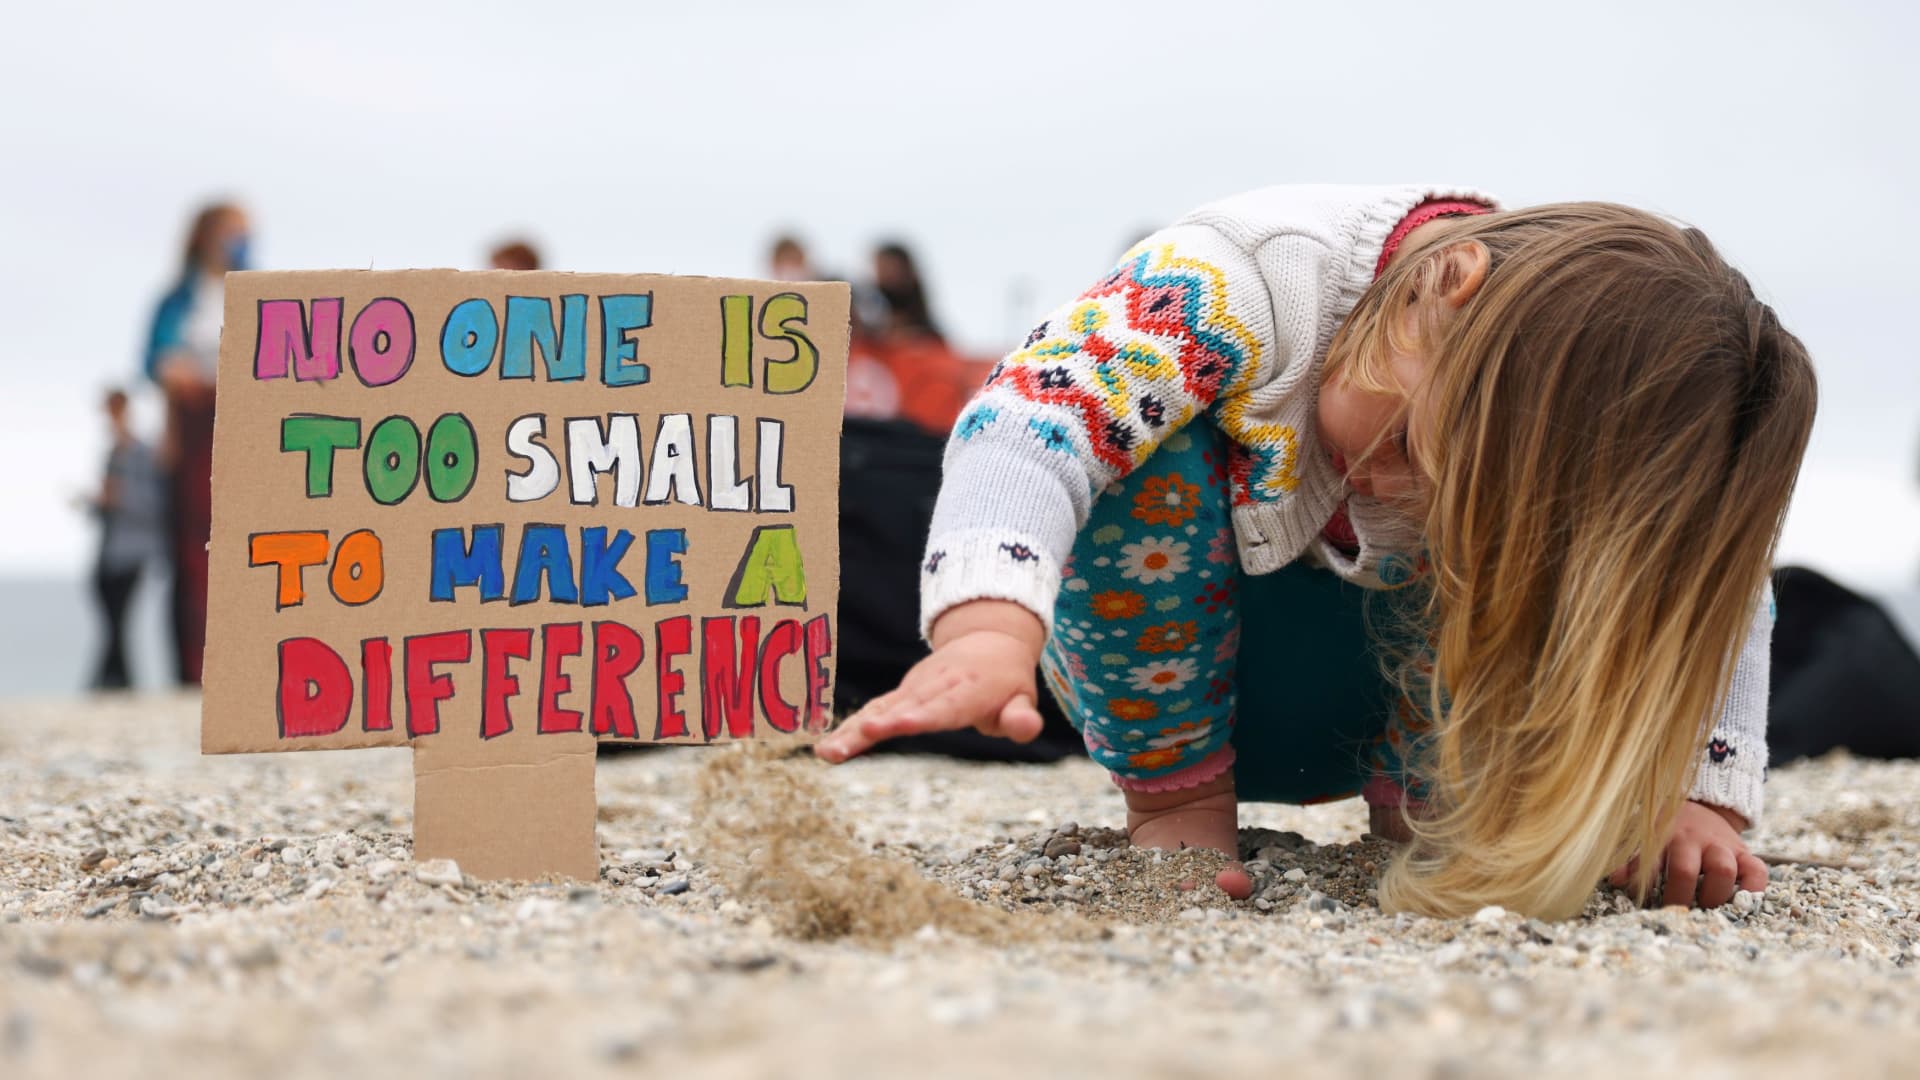 A girl plays with sand during a protest of the Cornwall Climate Youth Alliance in partnership with Fridays for Future and Climate Live, at Gyllyngvase Beach, in Falmouth, on the sidelines of the G7 summit in Cornwall, Britain, June 11, 2021.